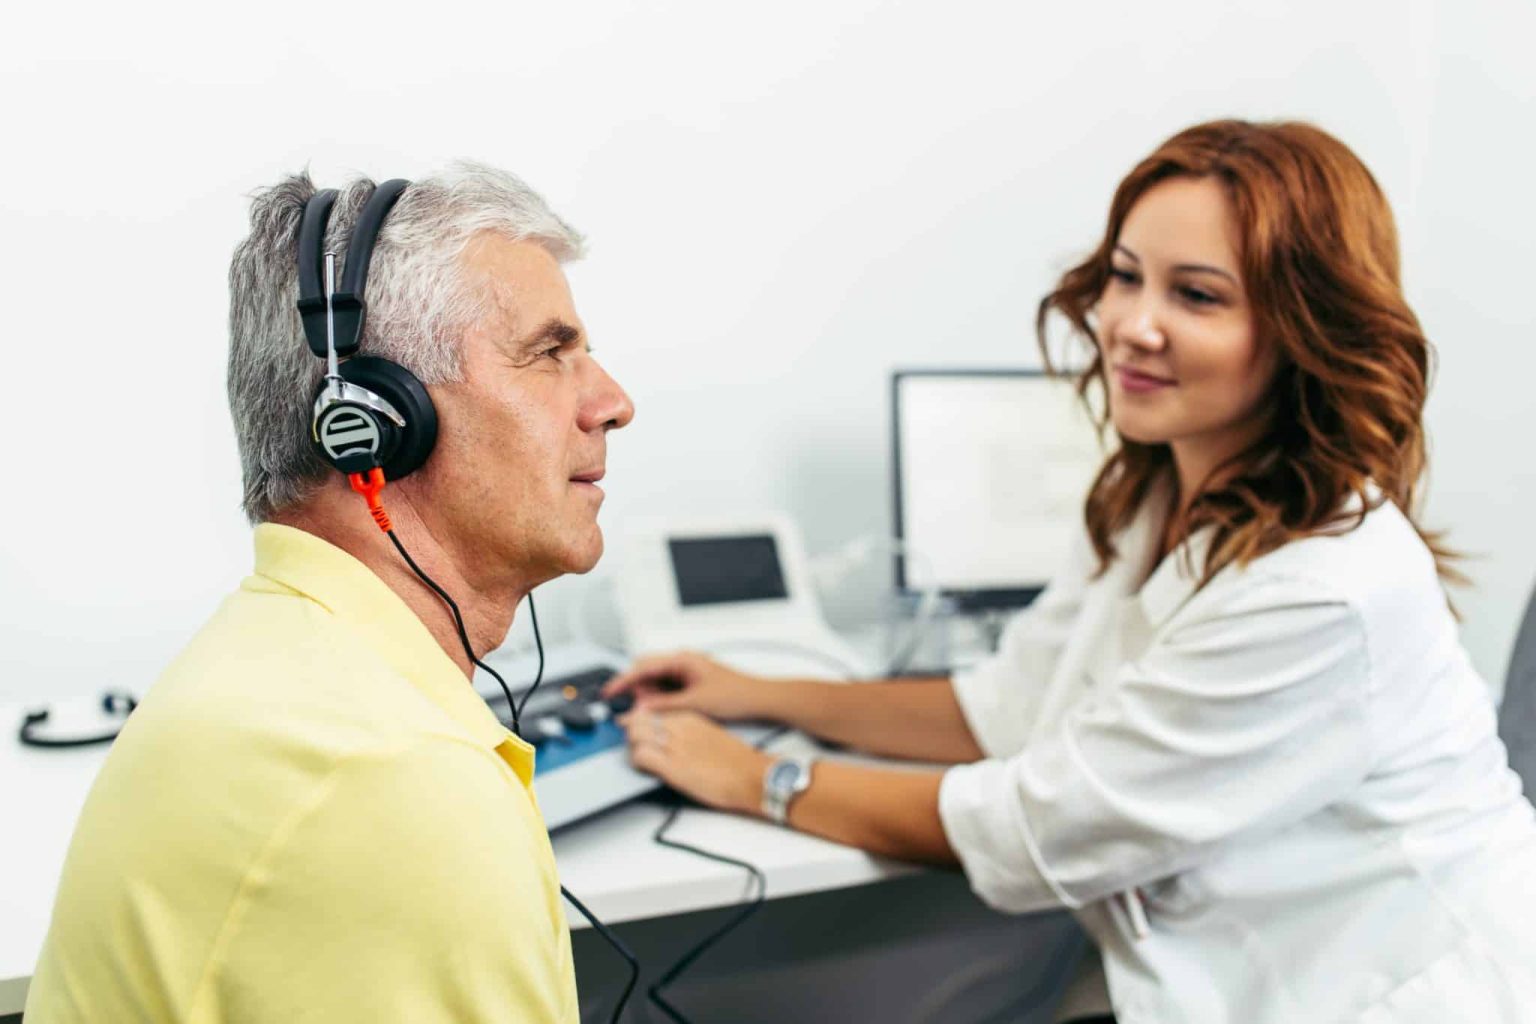 Man in an audiologists office with headphones on listening intently during a hearing test